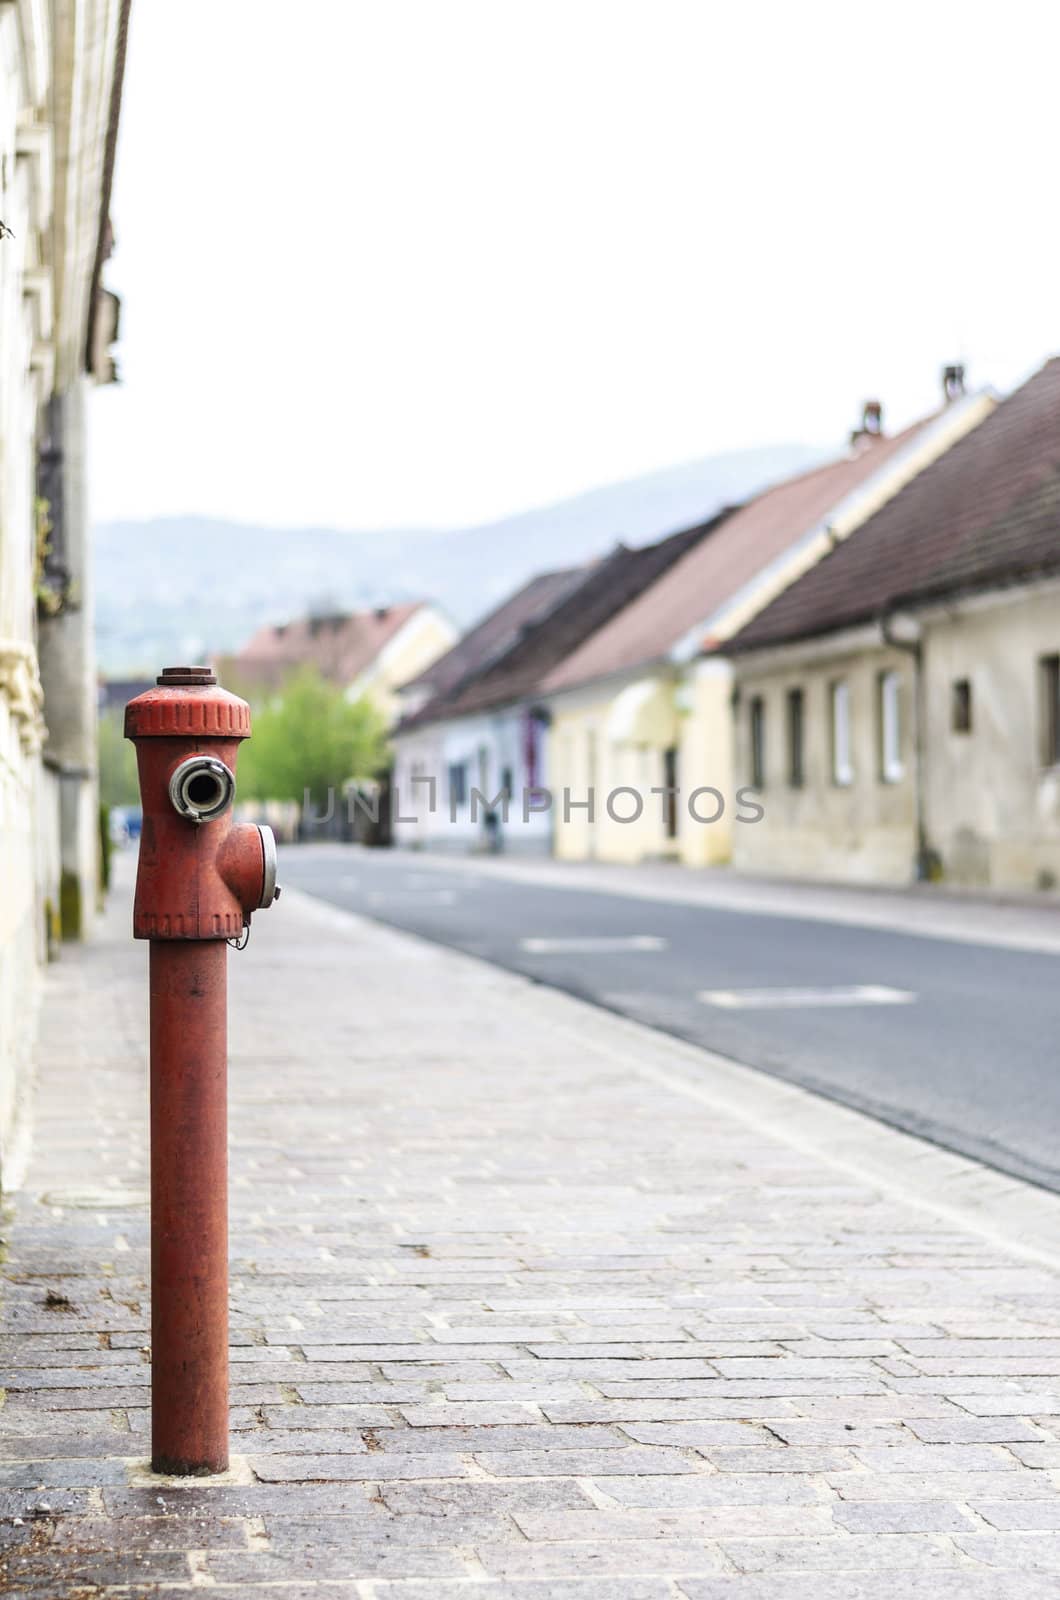 Red fire hydrant located on a sidewalk of village street.